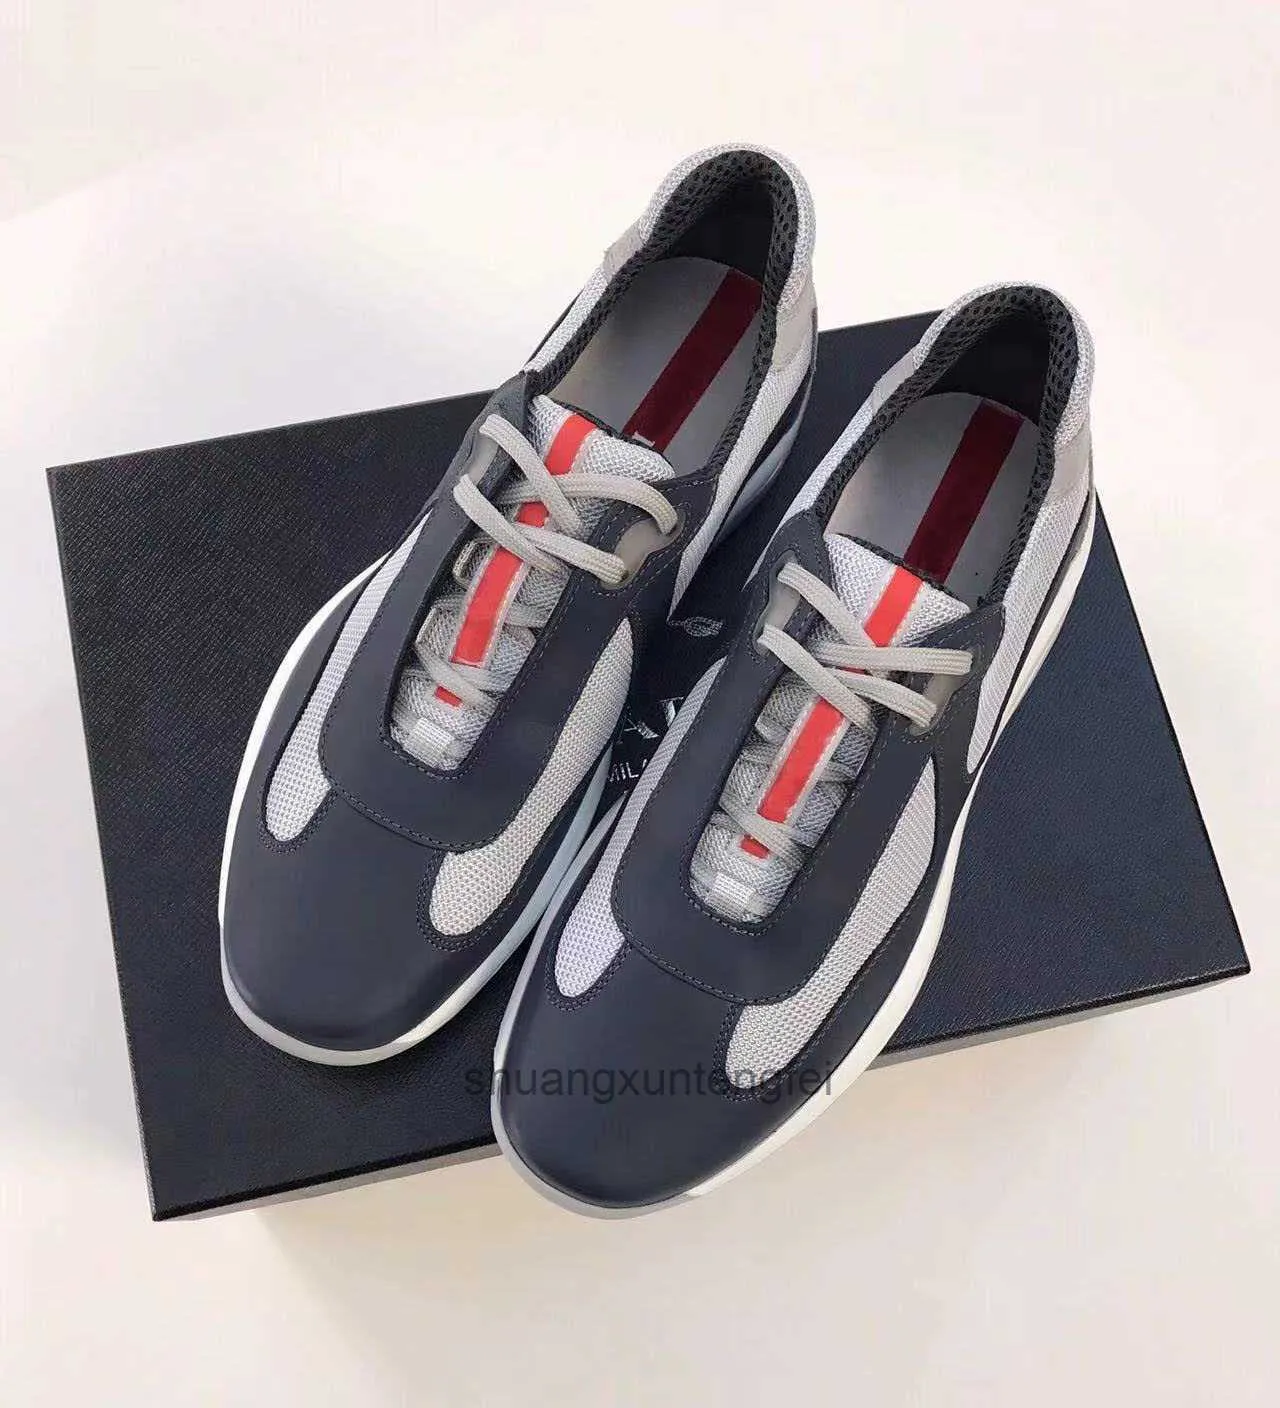 Perfect-Brands America Cup Sneakers buty komfort swobodny spacery